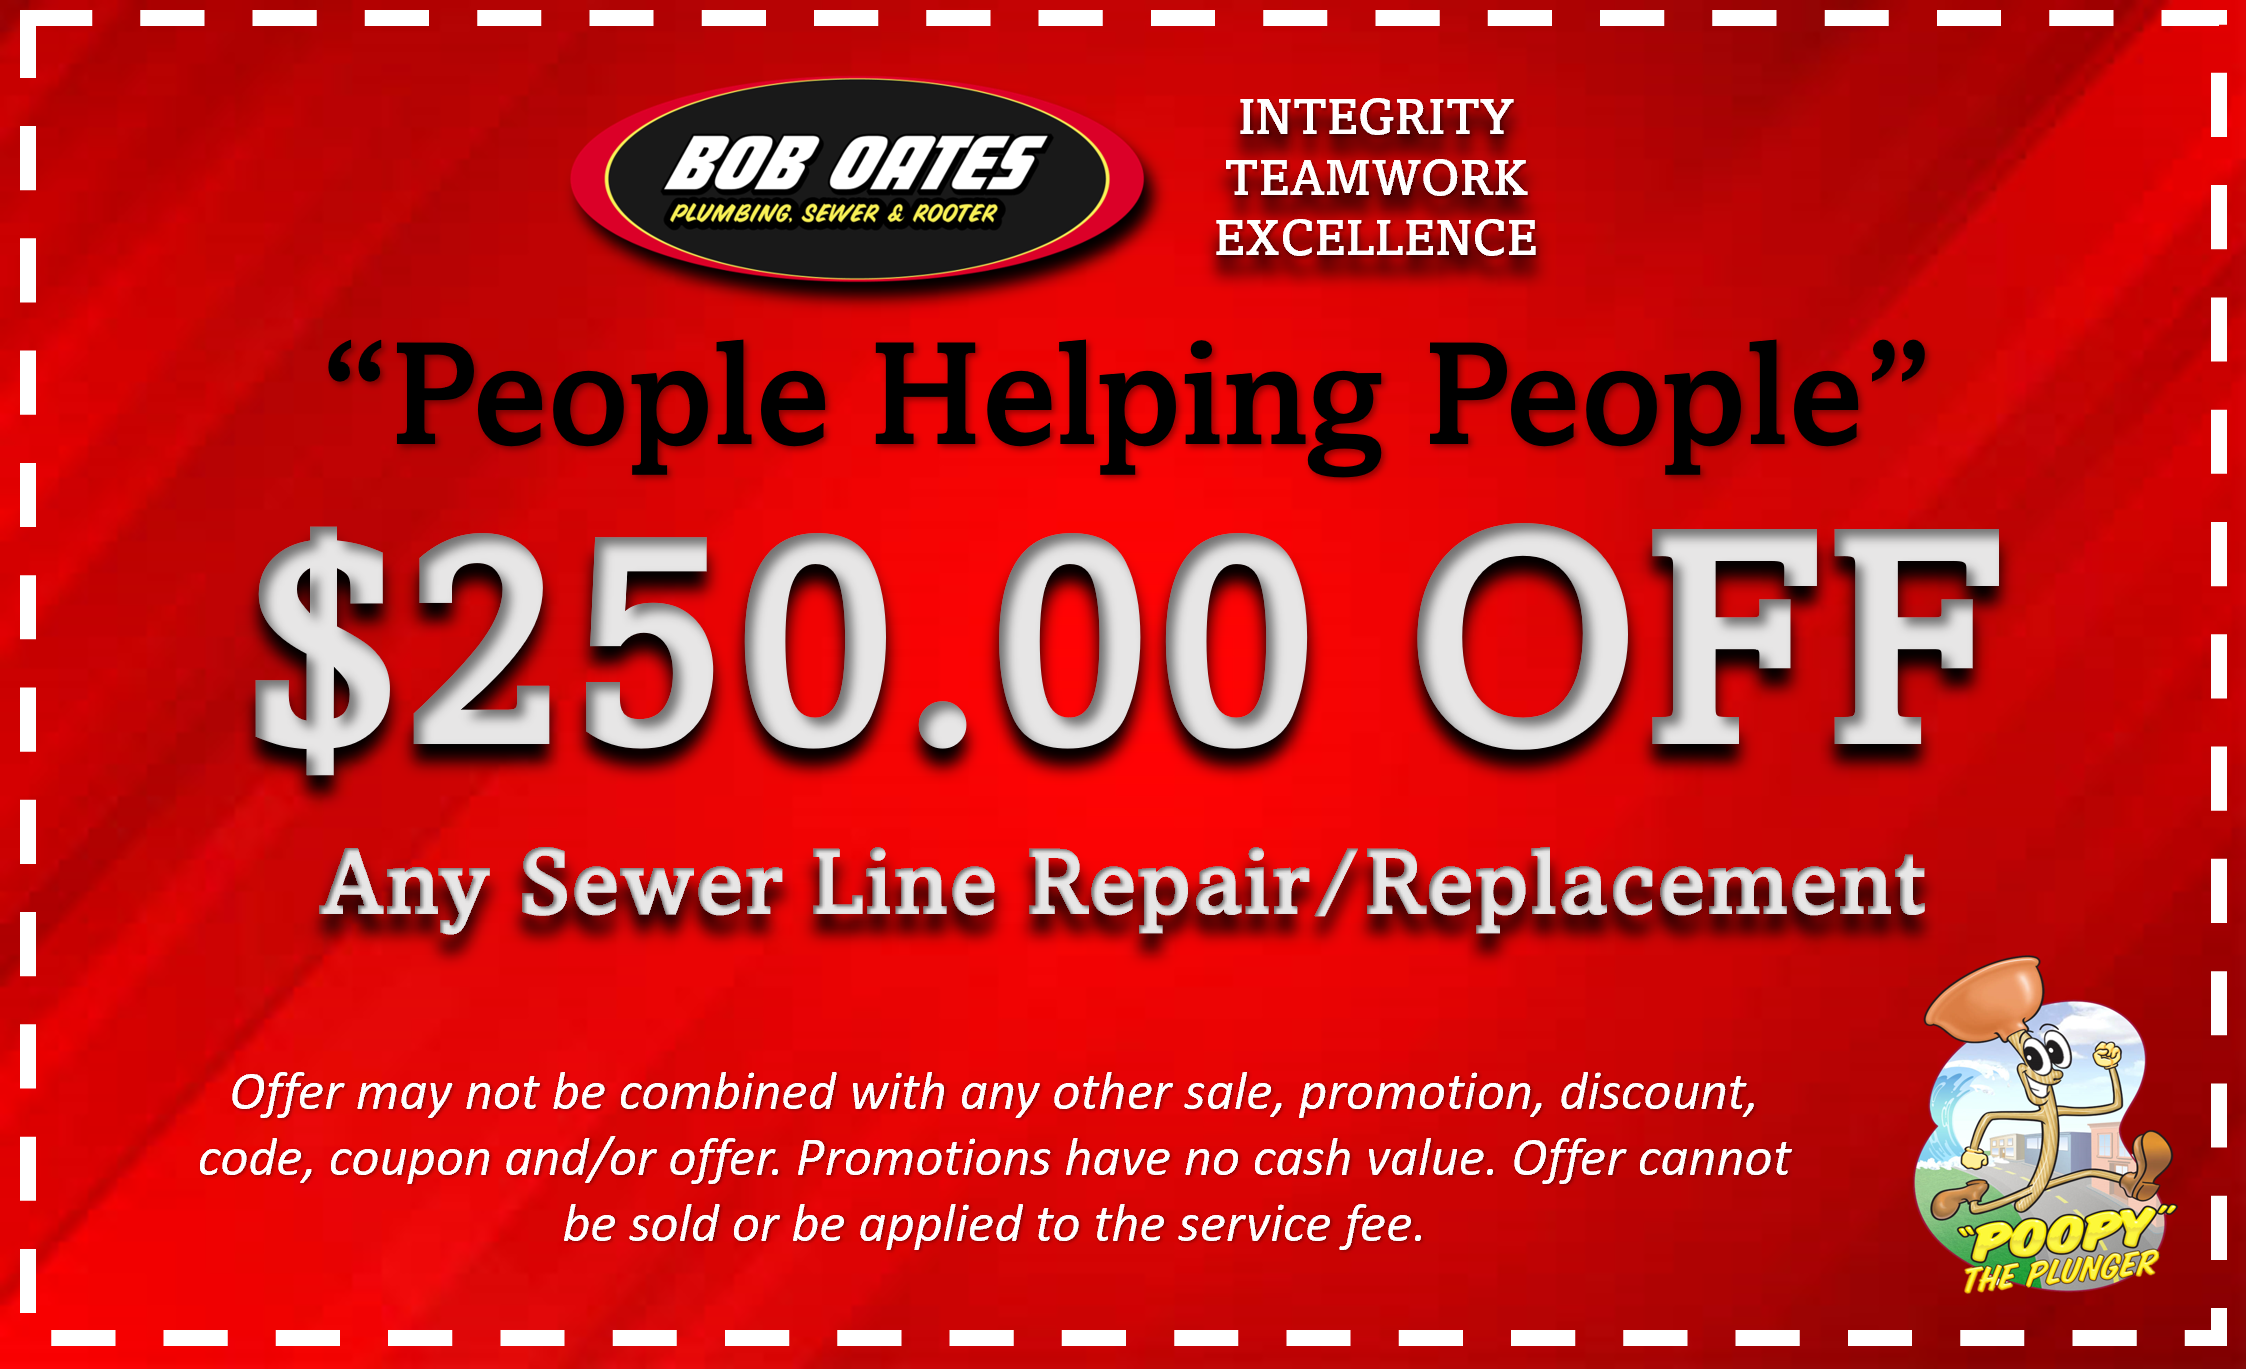 Coupon for $250 off any sewer line repair or replacement